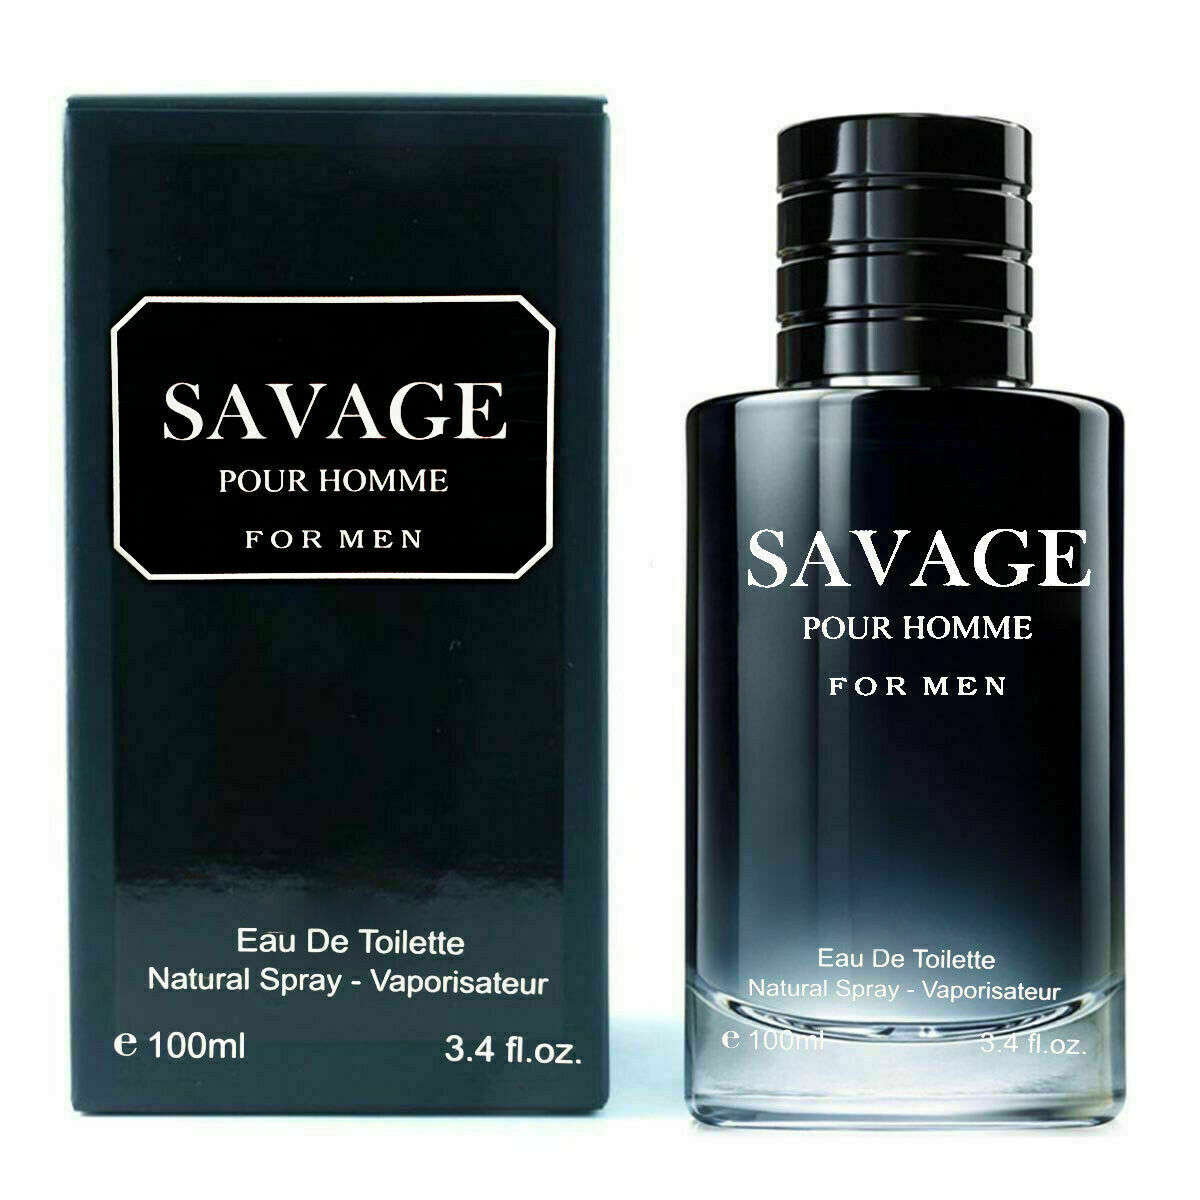 Savage 100 ml 3.4 oz High Quality Impression Cologne EDT Spray for Men - image 1 of 2